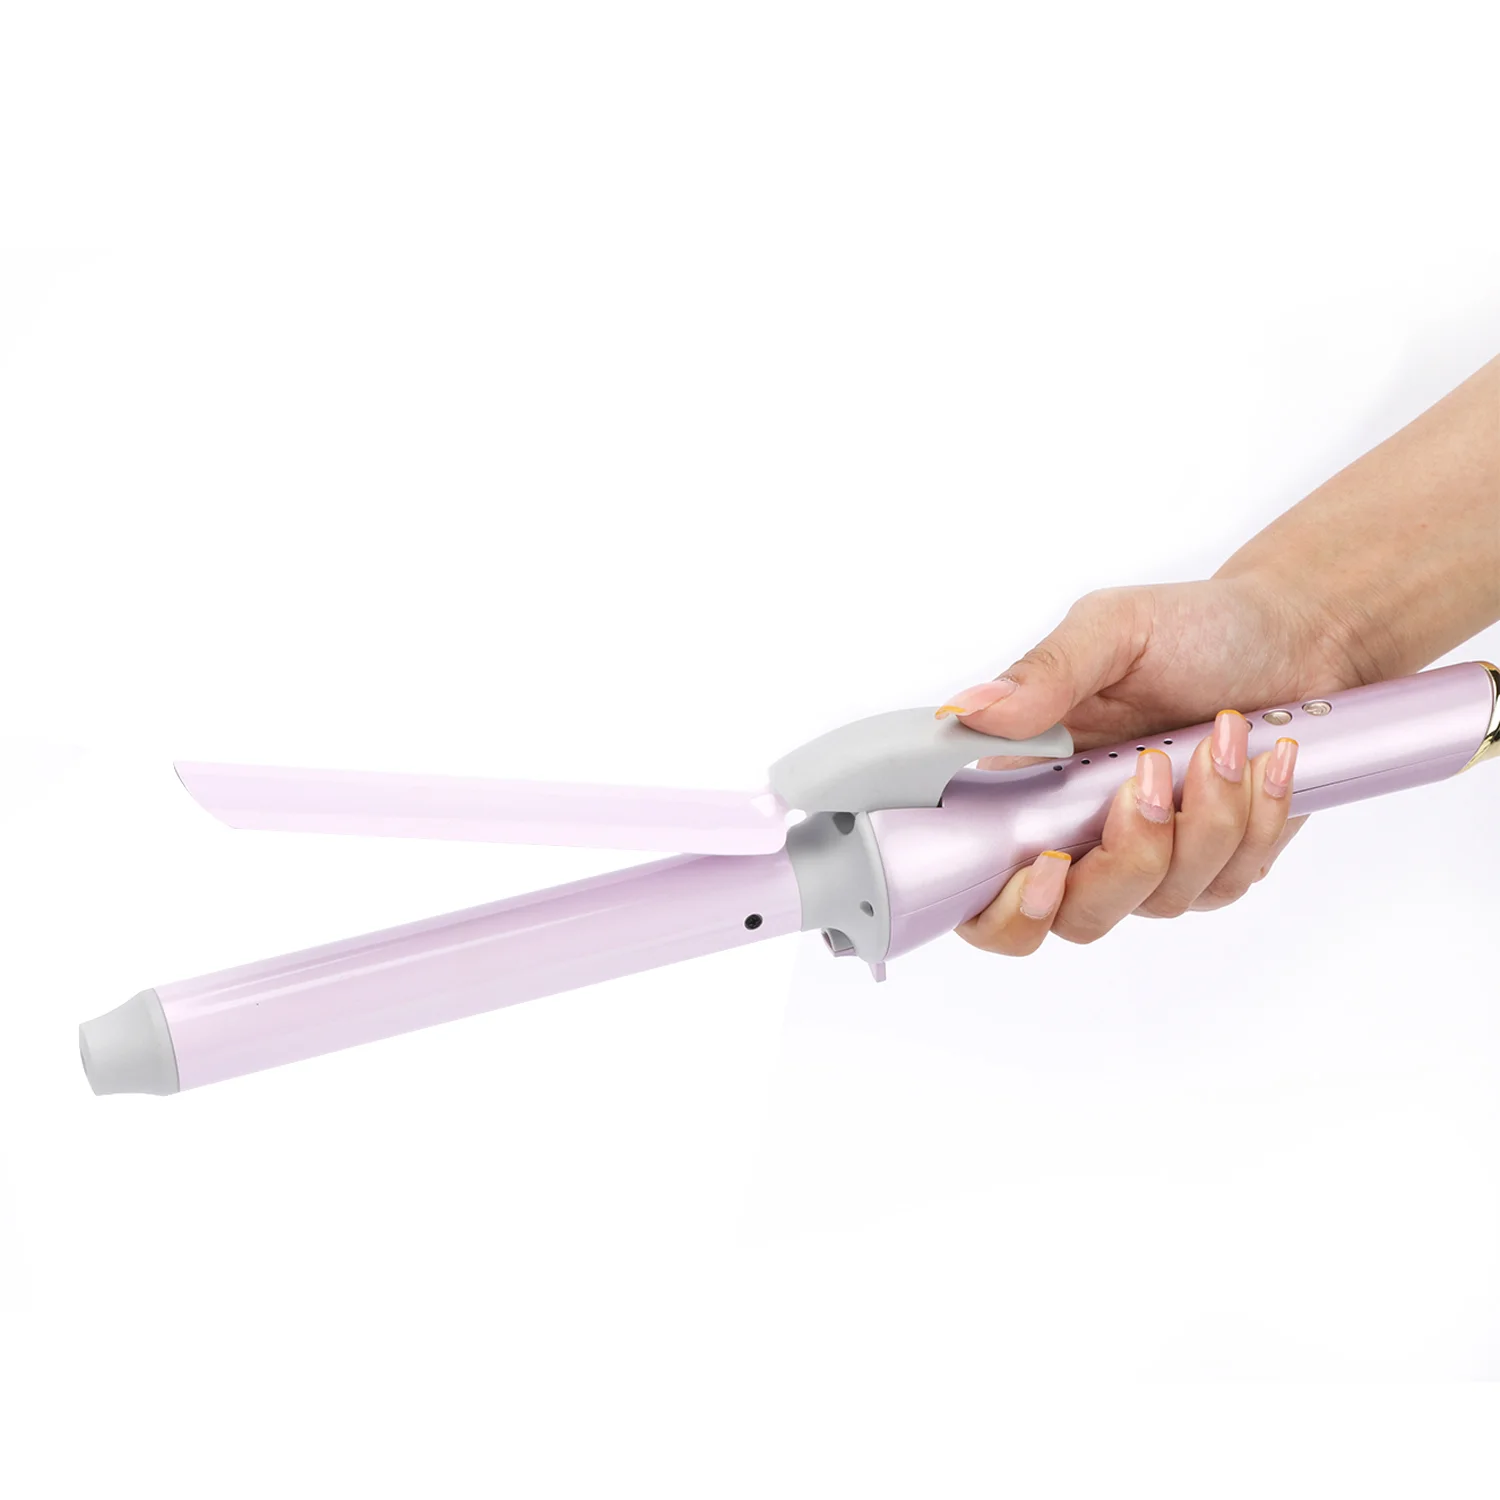 New product professional  curling iron styling tool electric curling iron Hair Cur with negative ions and infrared